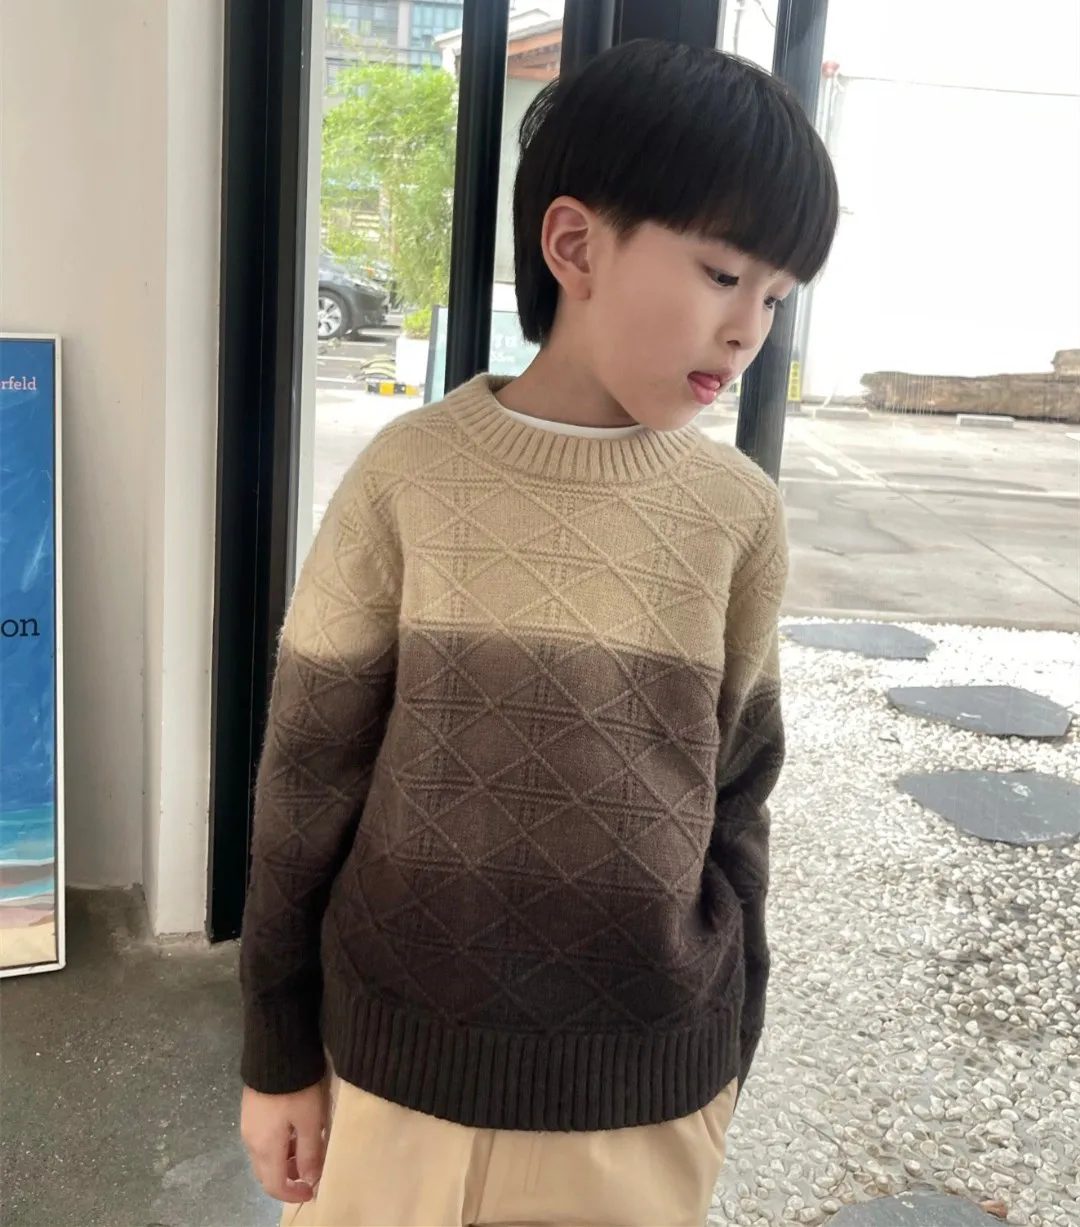 

Boys autumn winter knitted sweater Taupe Gradient lozenge Check Pullover Sweater fashionable pullover top